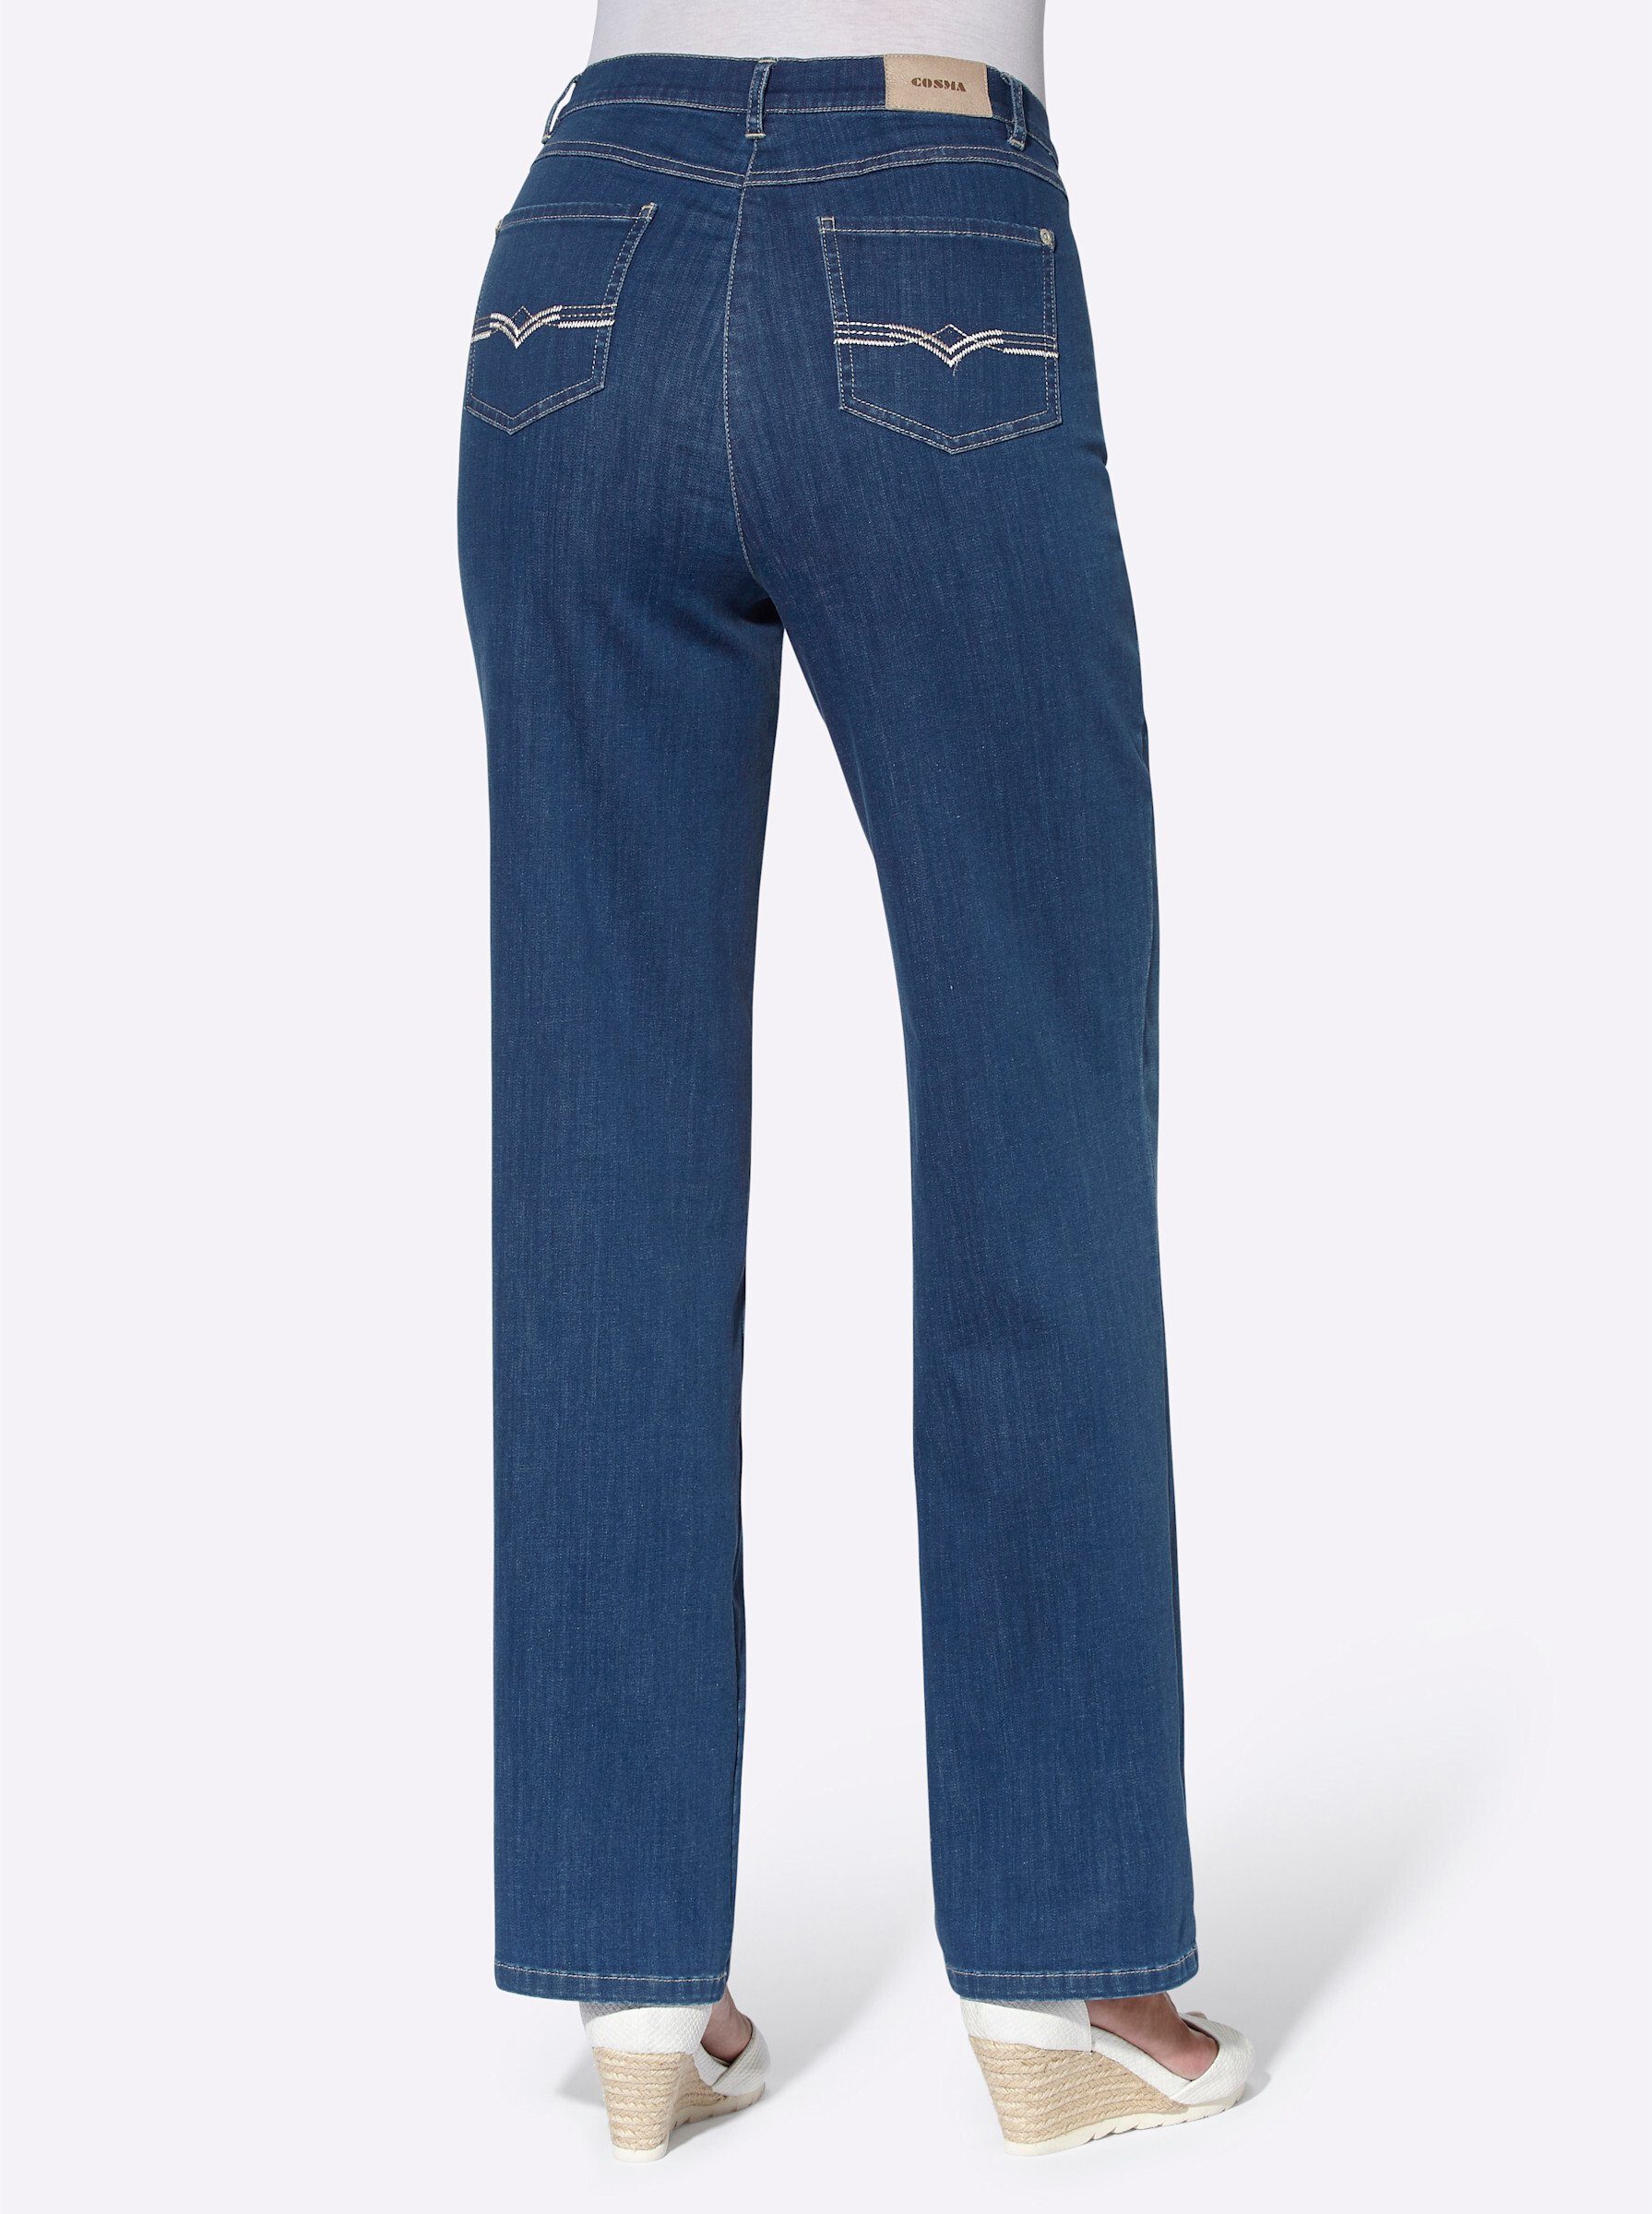 Jeans Cosma Bequeme blue-stone-washed